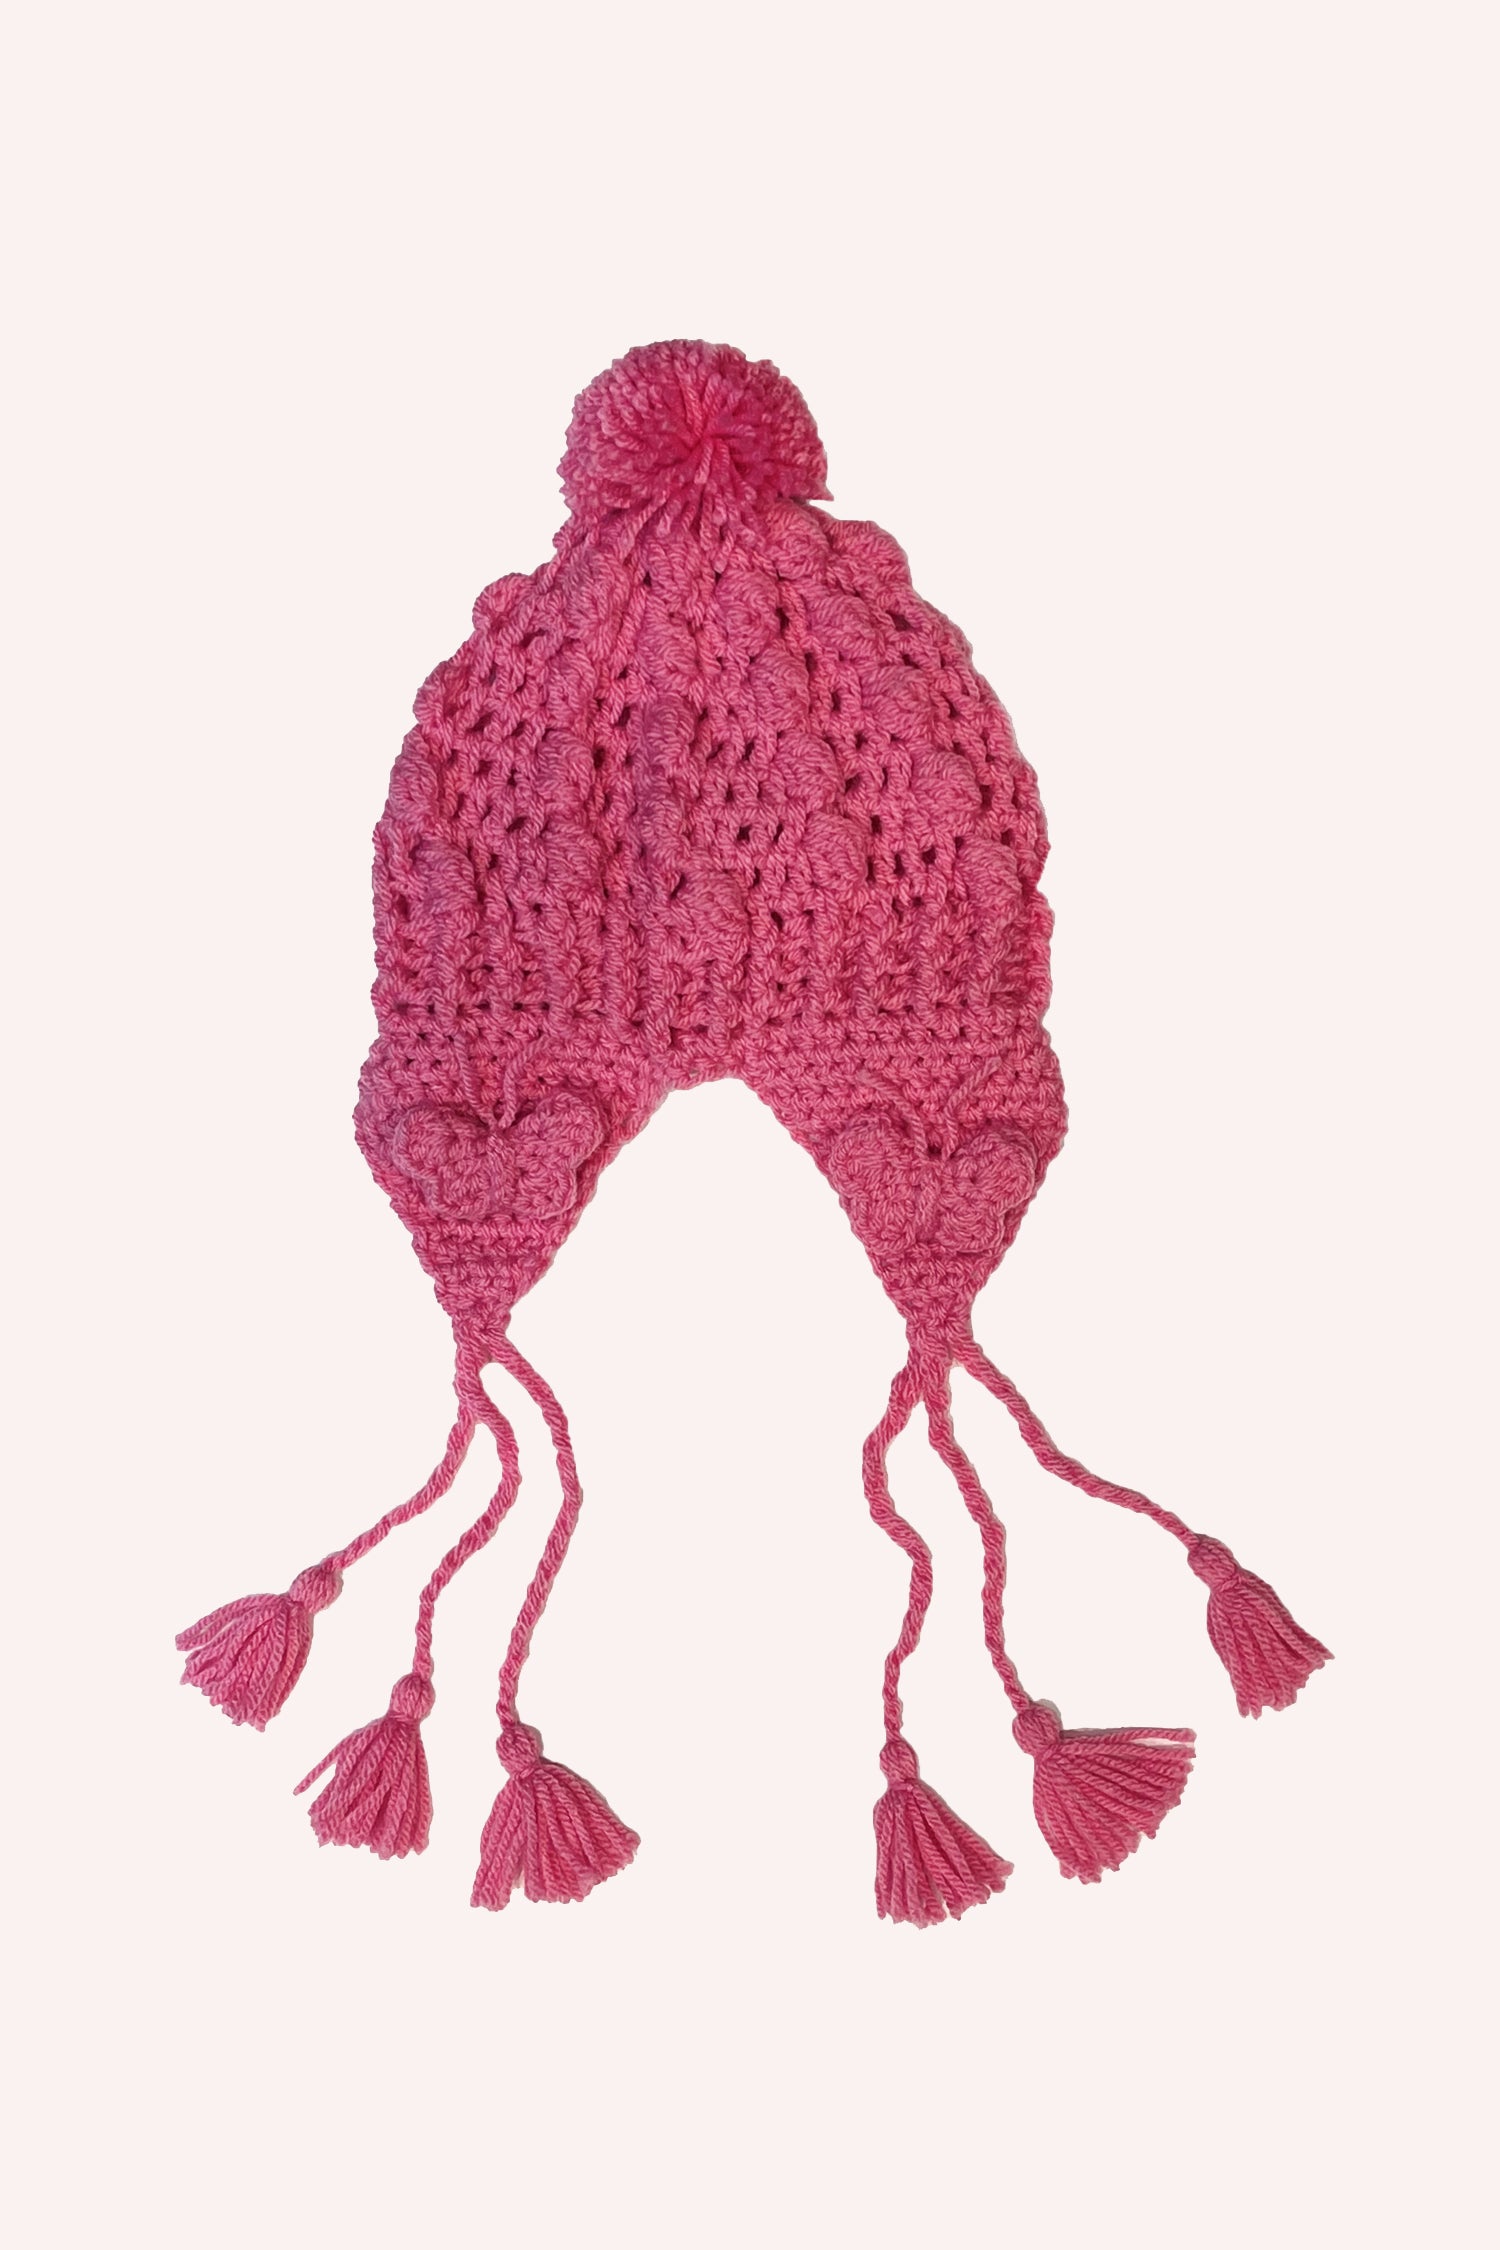 Medium crochet Hat rose, butterfly-shaped ear flaps, 3 strings on each side, bobbles at the ends